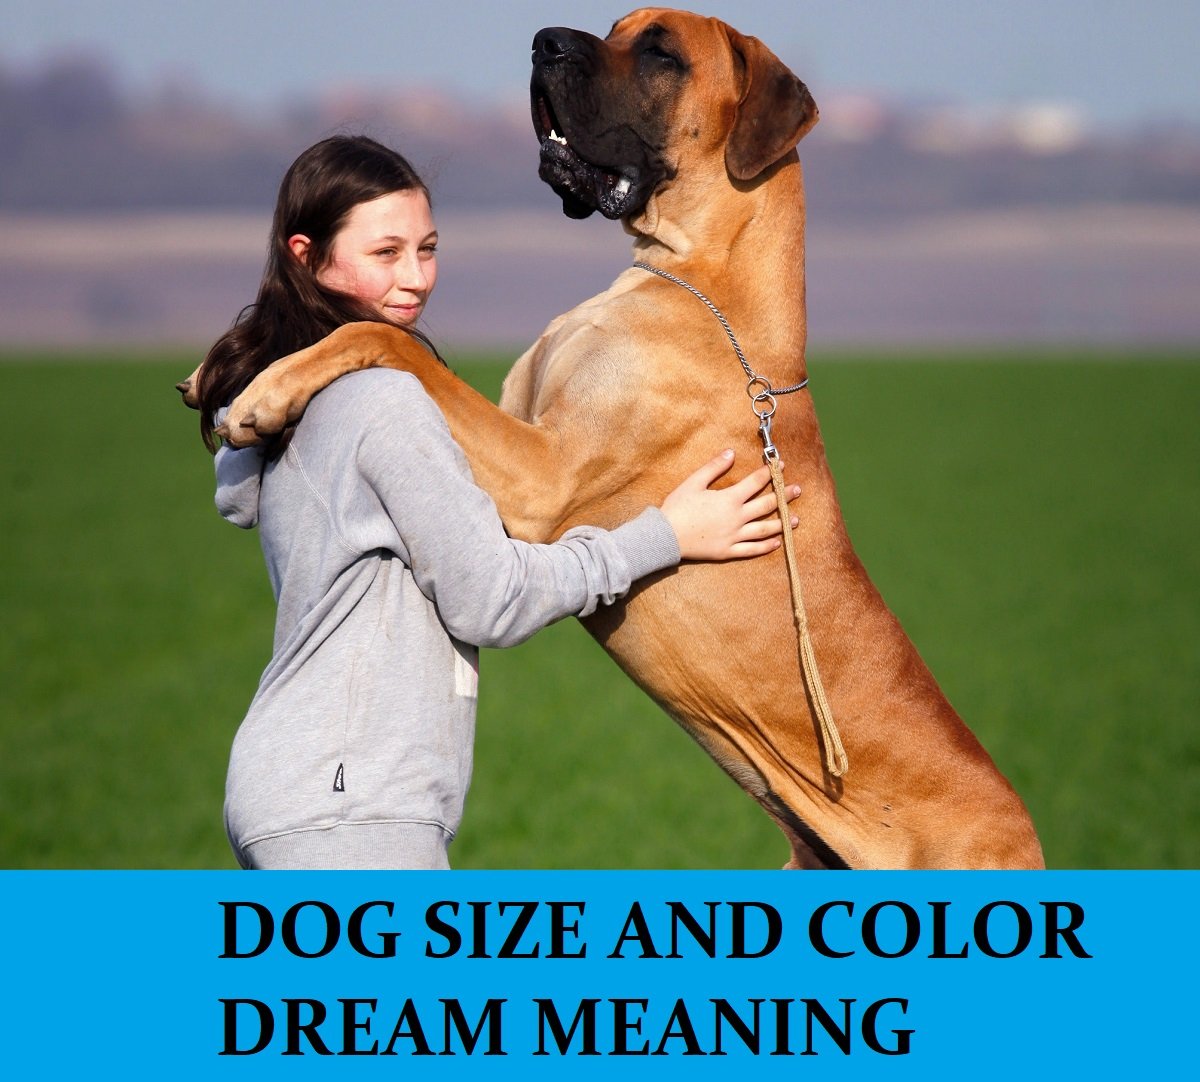 dream meaning dog